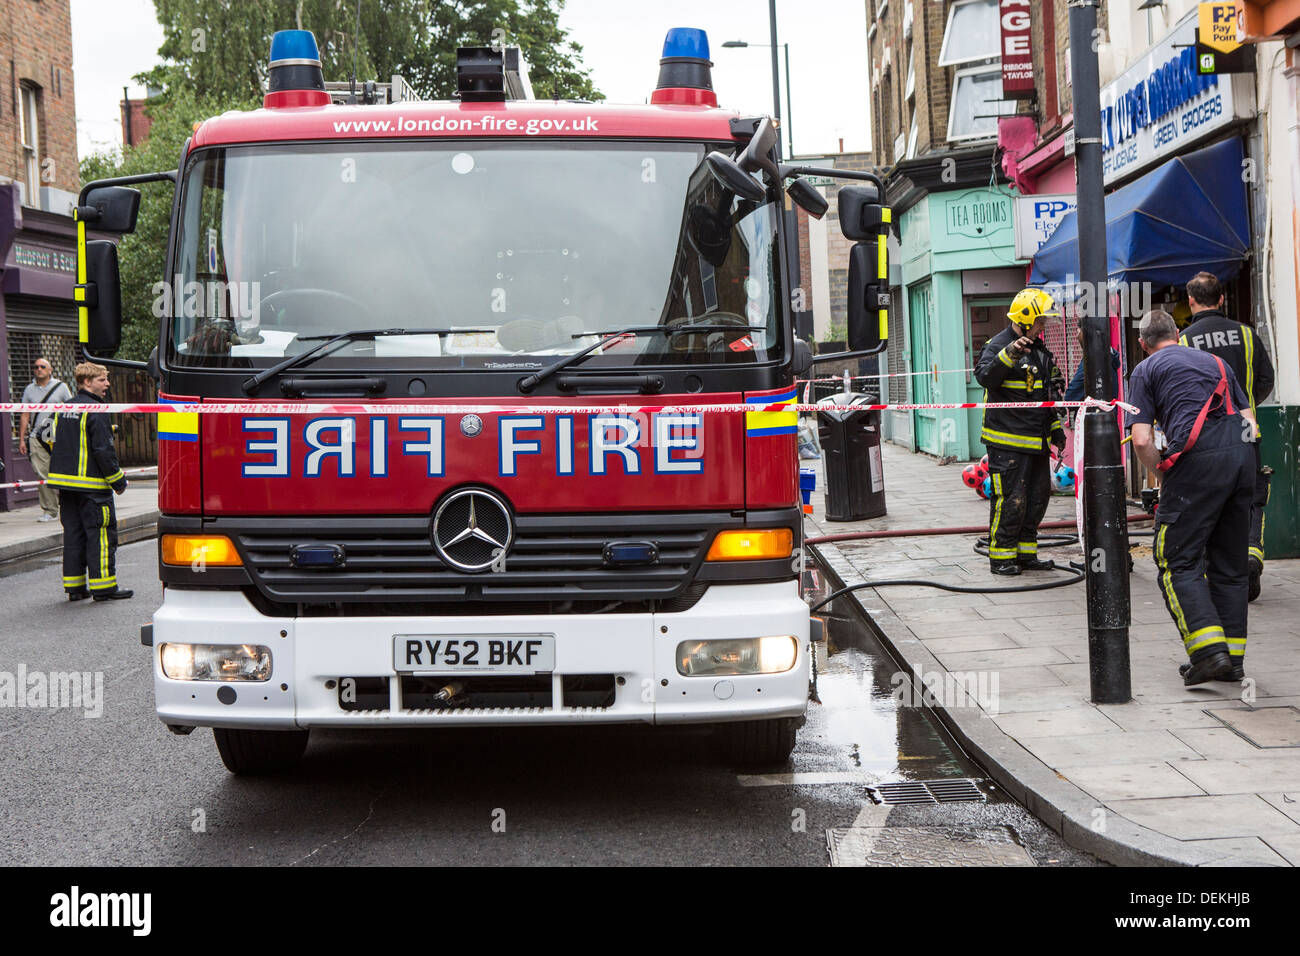 Emergency services Firefighters from the London Fire Brigade respond to an emergency in Stoke Newington, London. Stock Photo